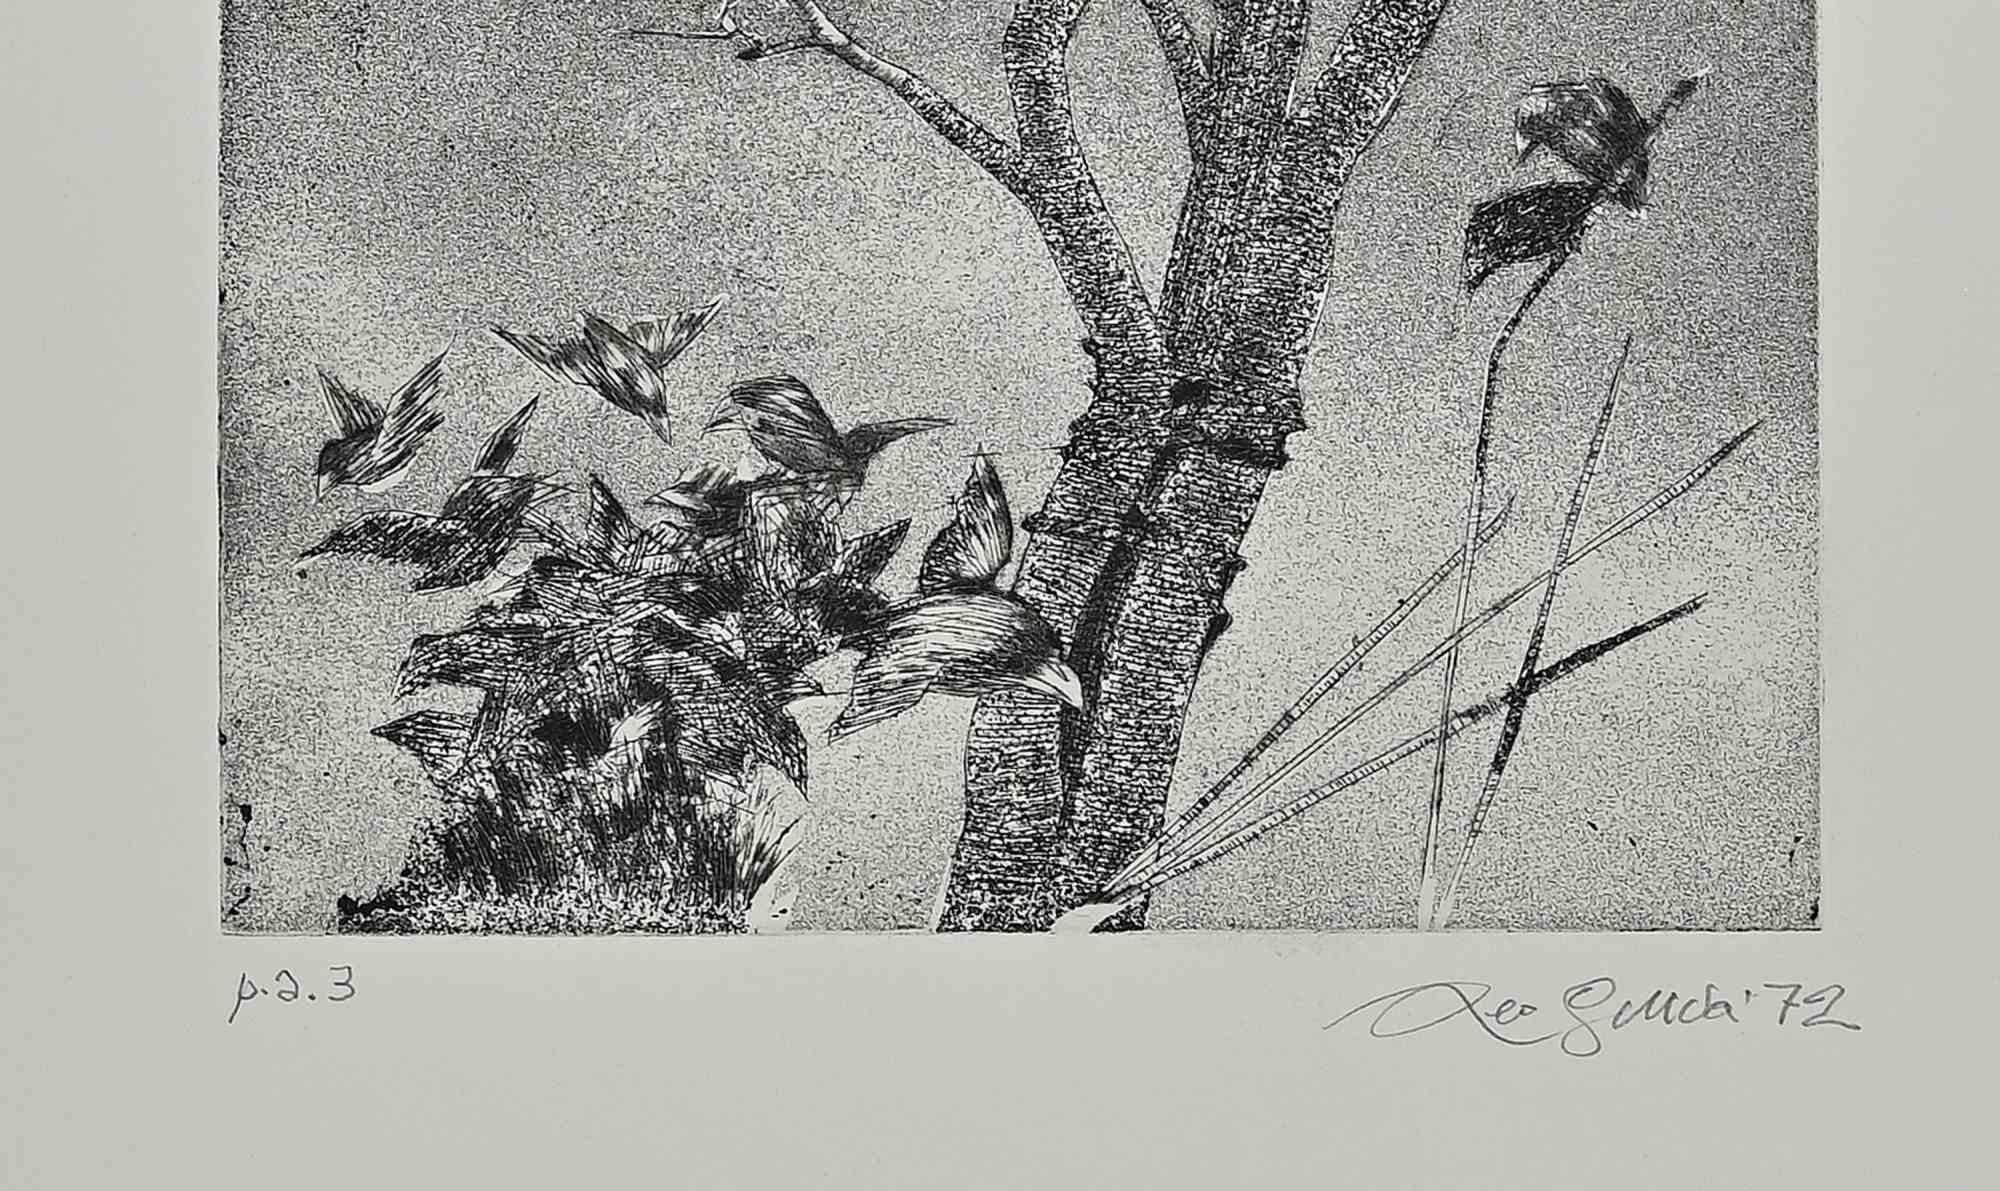 Man on a Tree - Etching by Leo Guida - 1972 For Sale 1